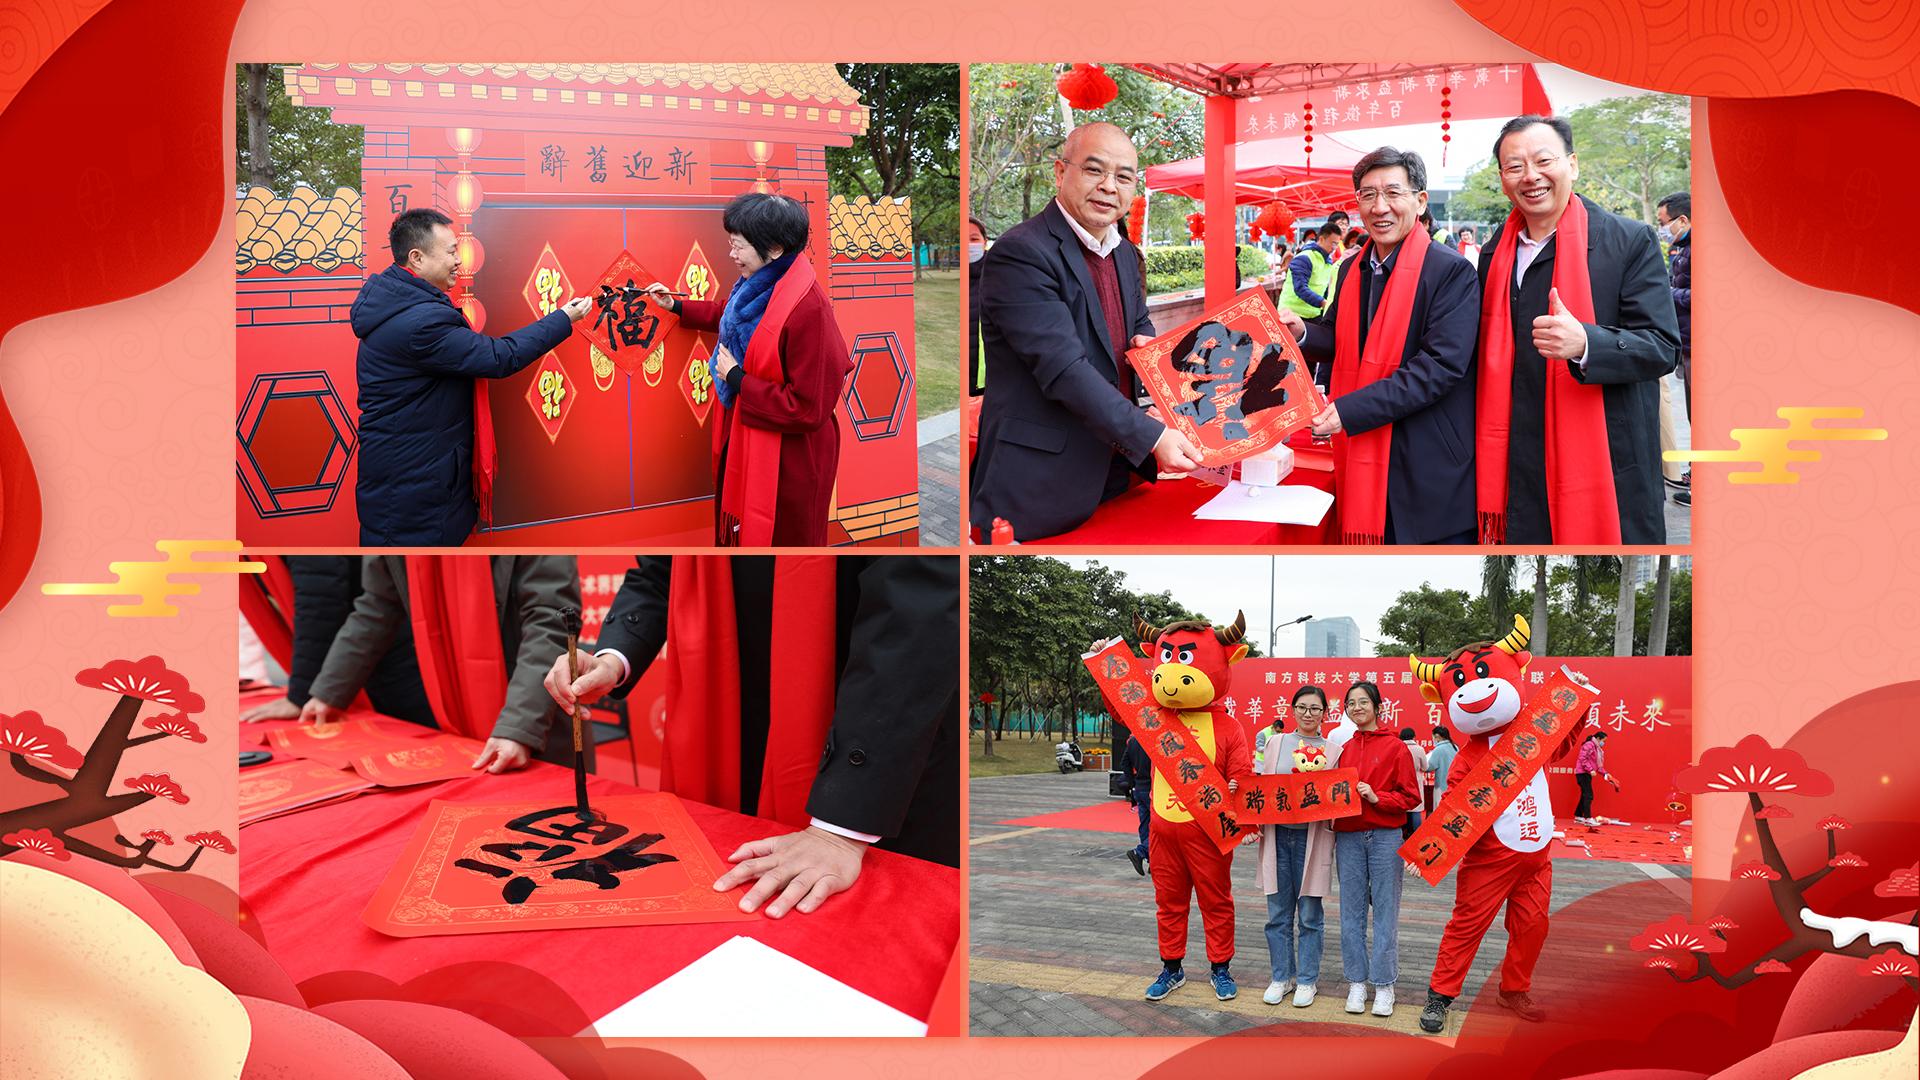 SUSTech holds the Fifth Spring Couplet Calligraphy Festival